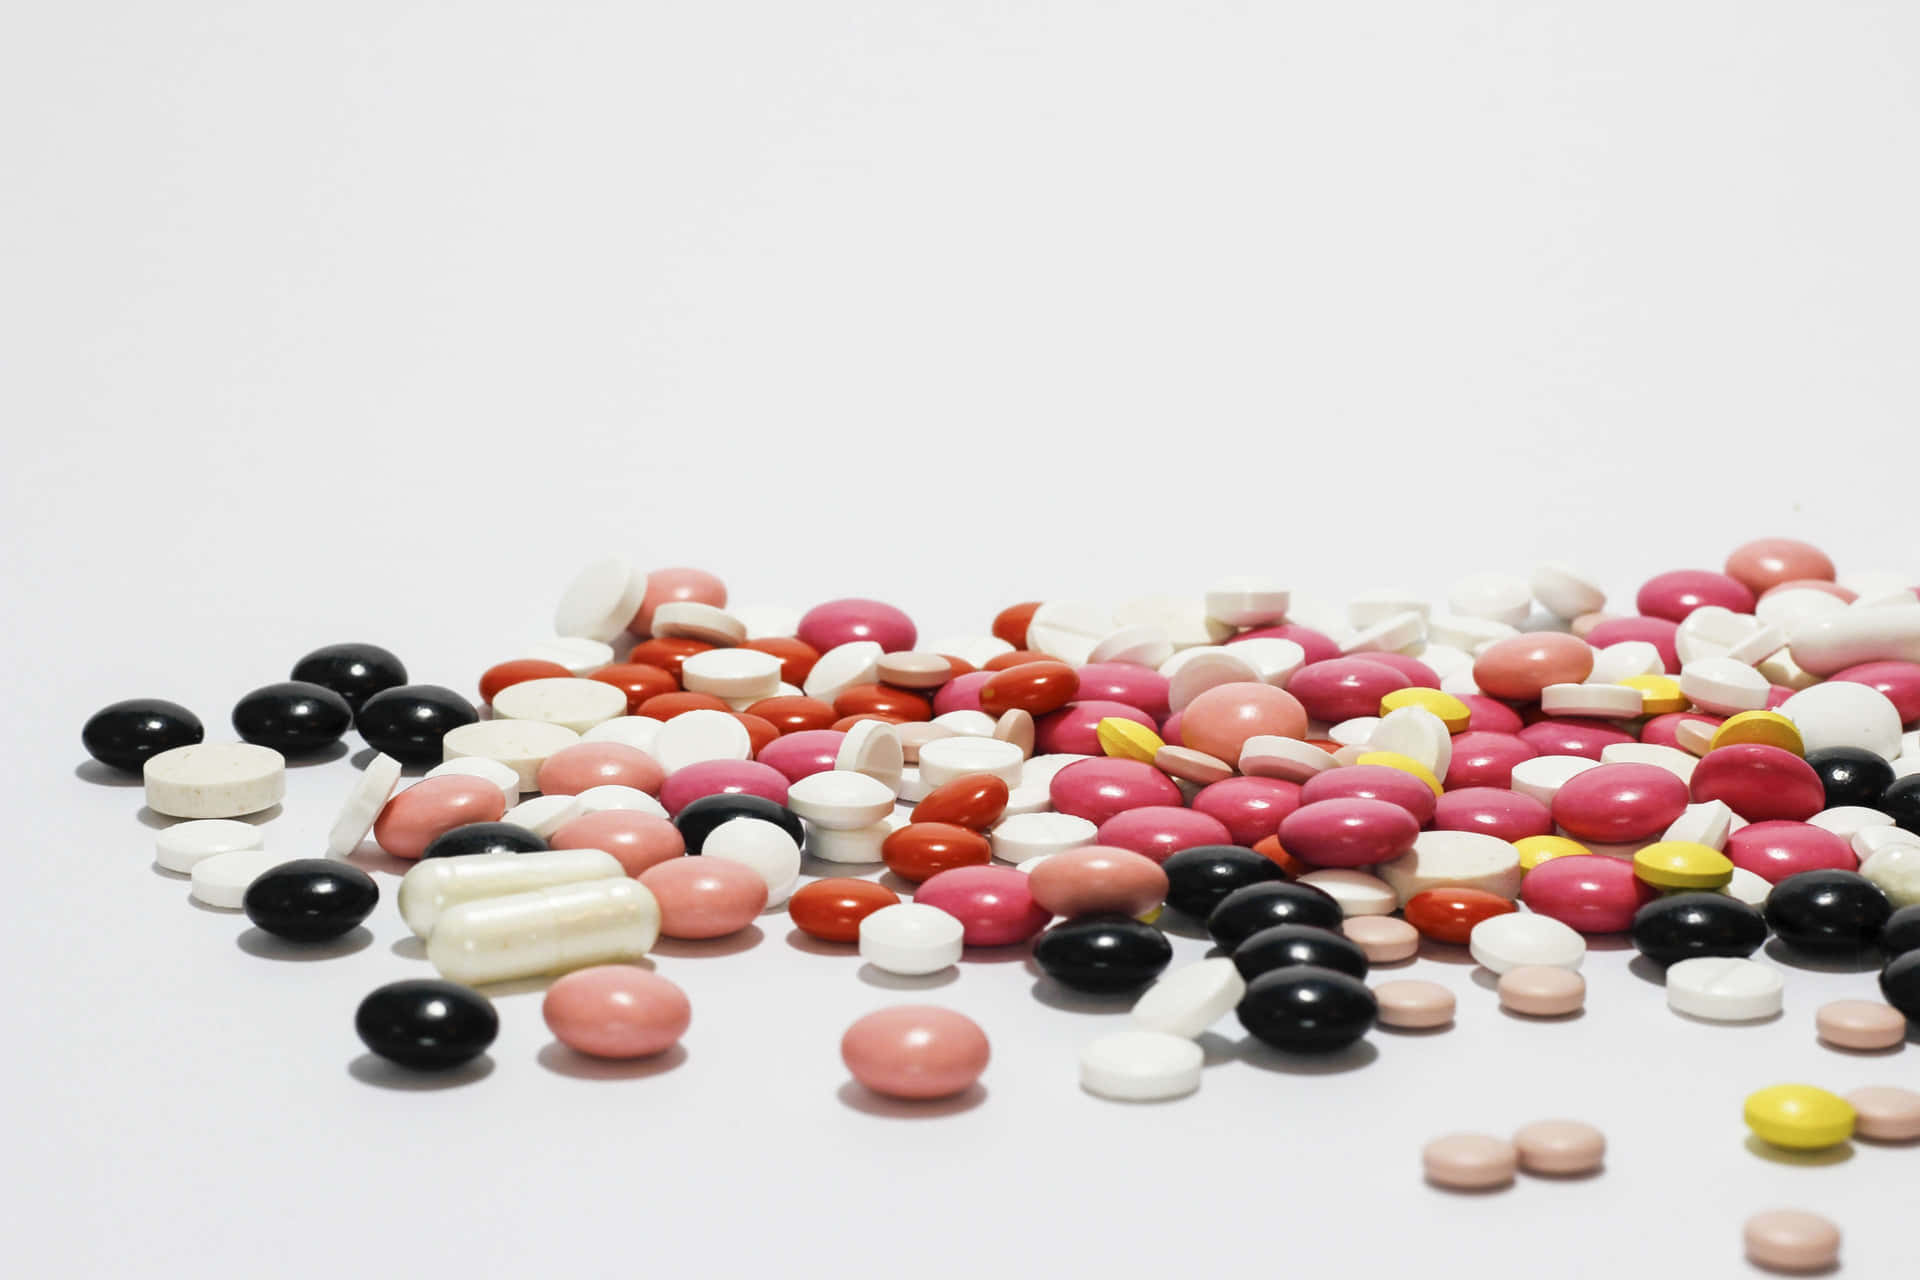 A Pile Of Pills On A White Surface